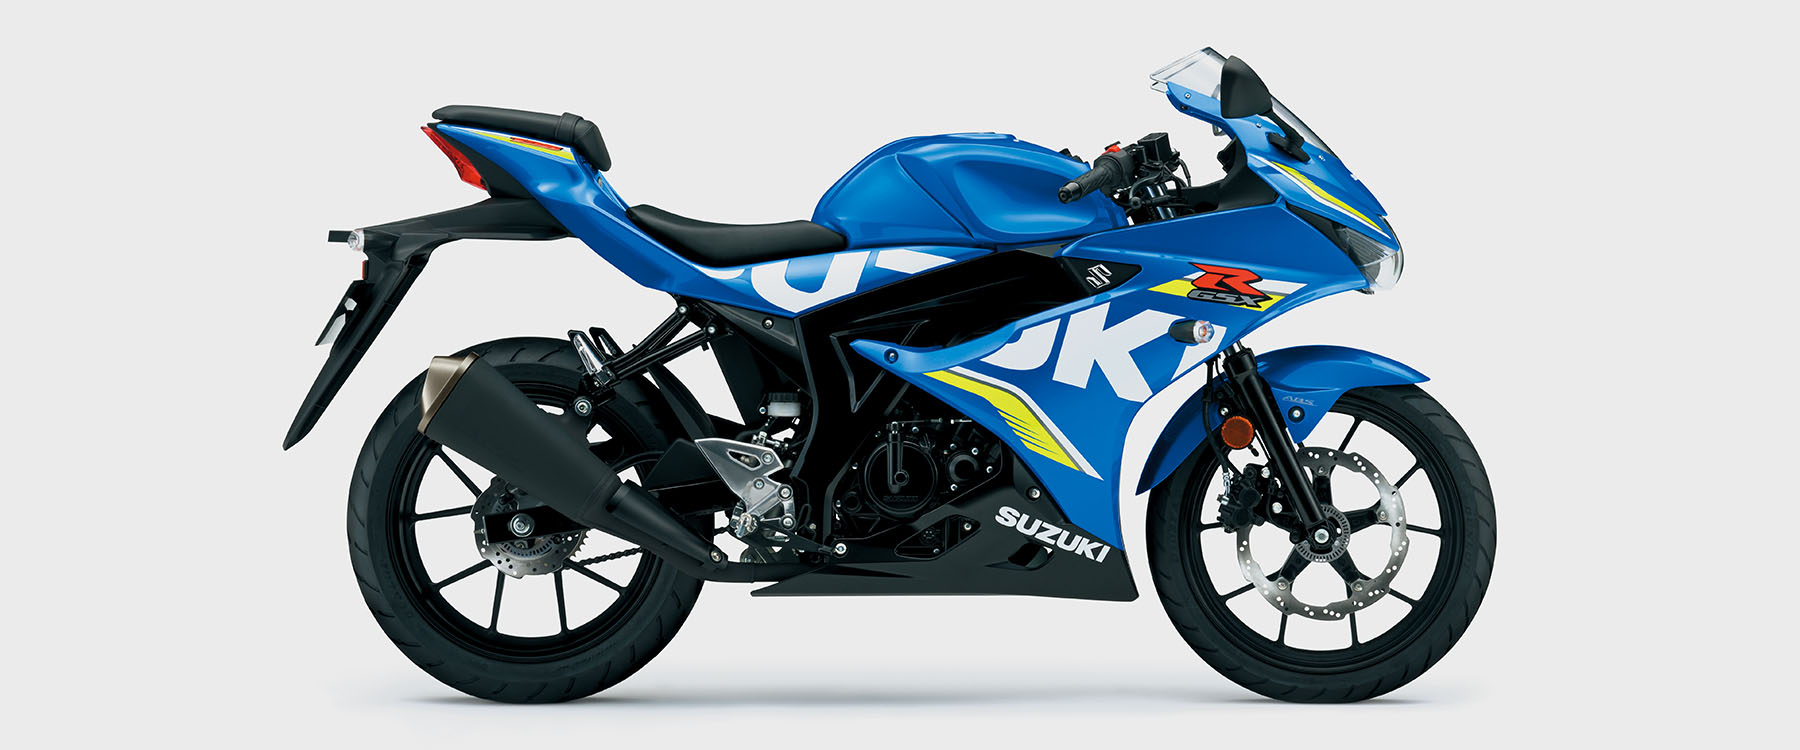 suzuki GSX-R125 motorcycle is top of the 125cc class